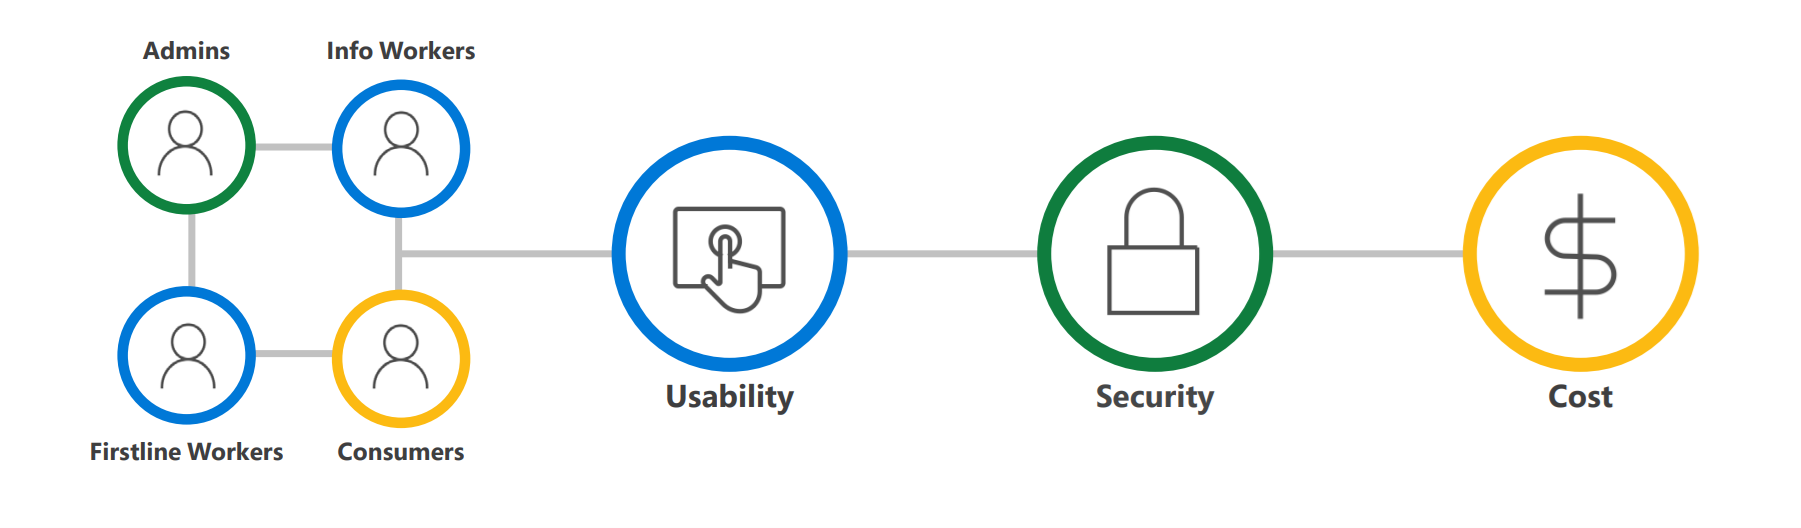 Workflow from left to right showcasing the authentication process for how administrators, info workers, firstline workers, and consumers arrive at the Usability, Security, and Cost value additions for passwordless authentication.